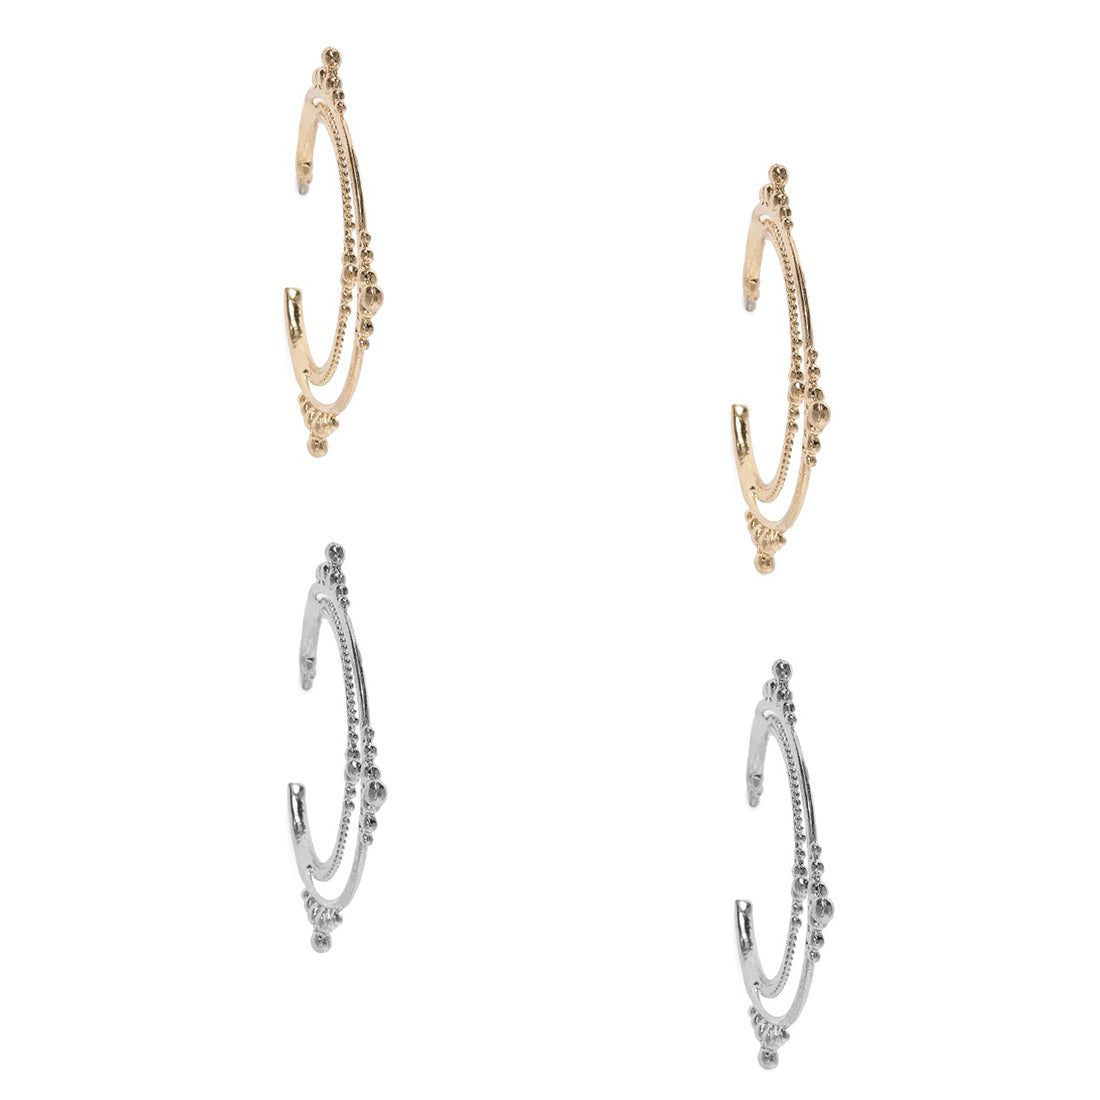 Set of 2 Gold & Silver Ethnic Hoops